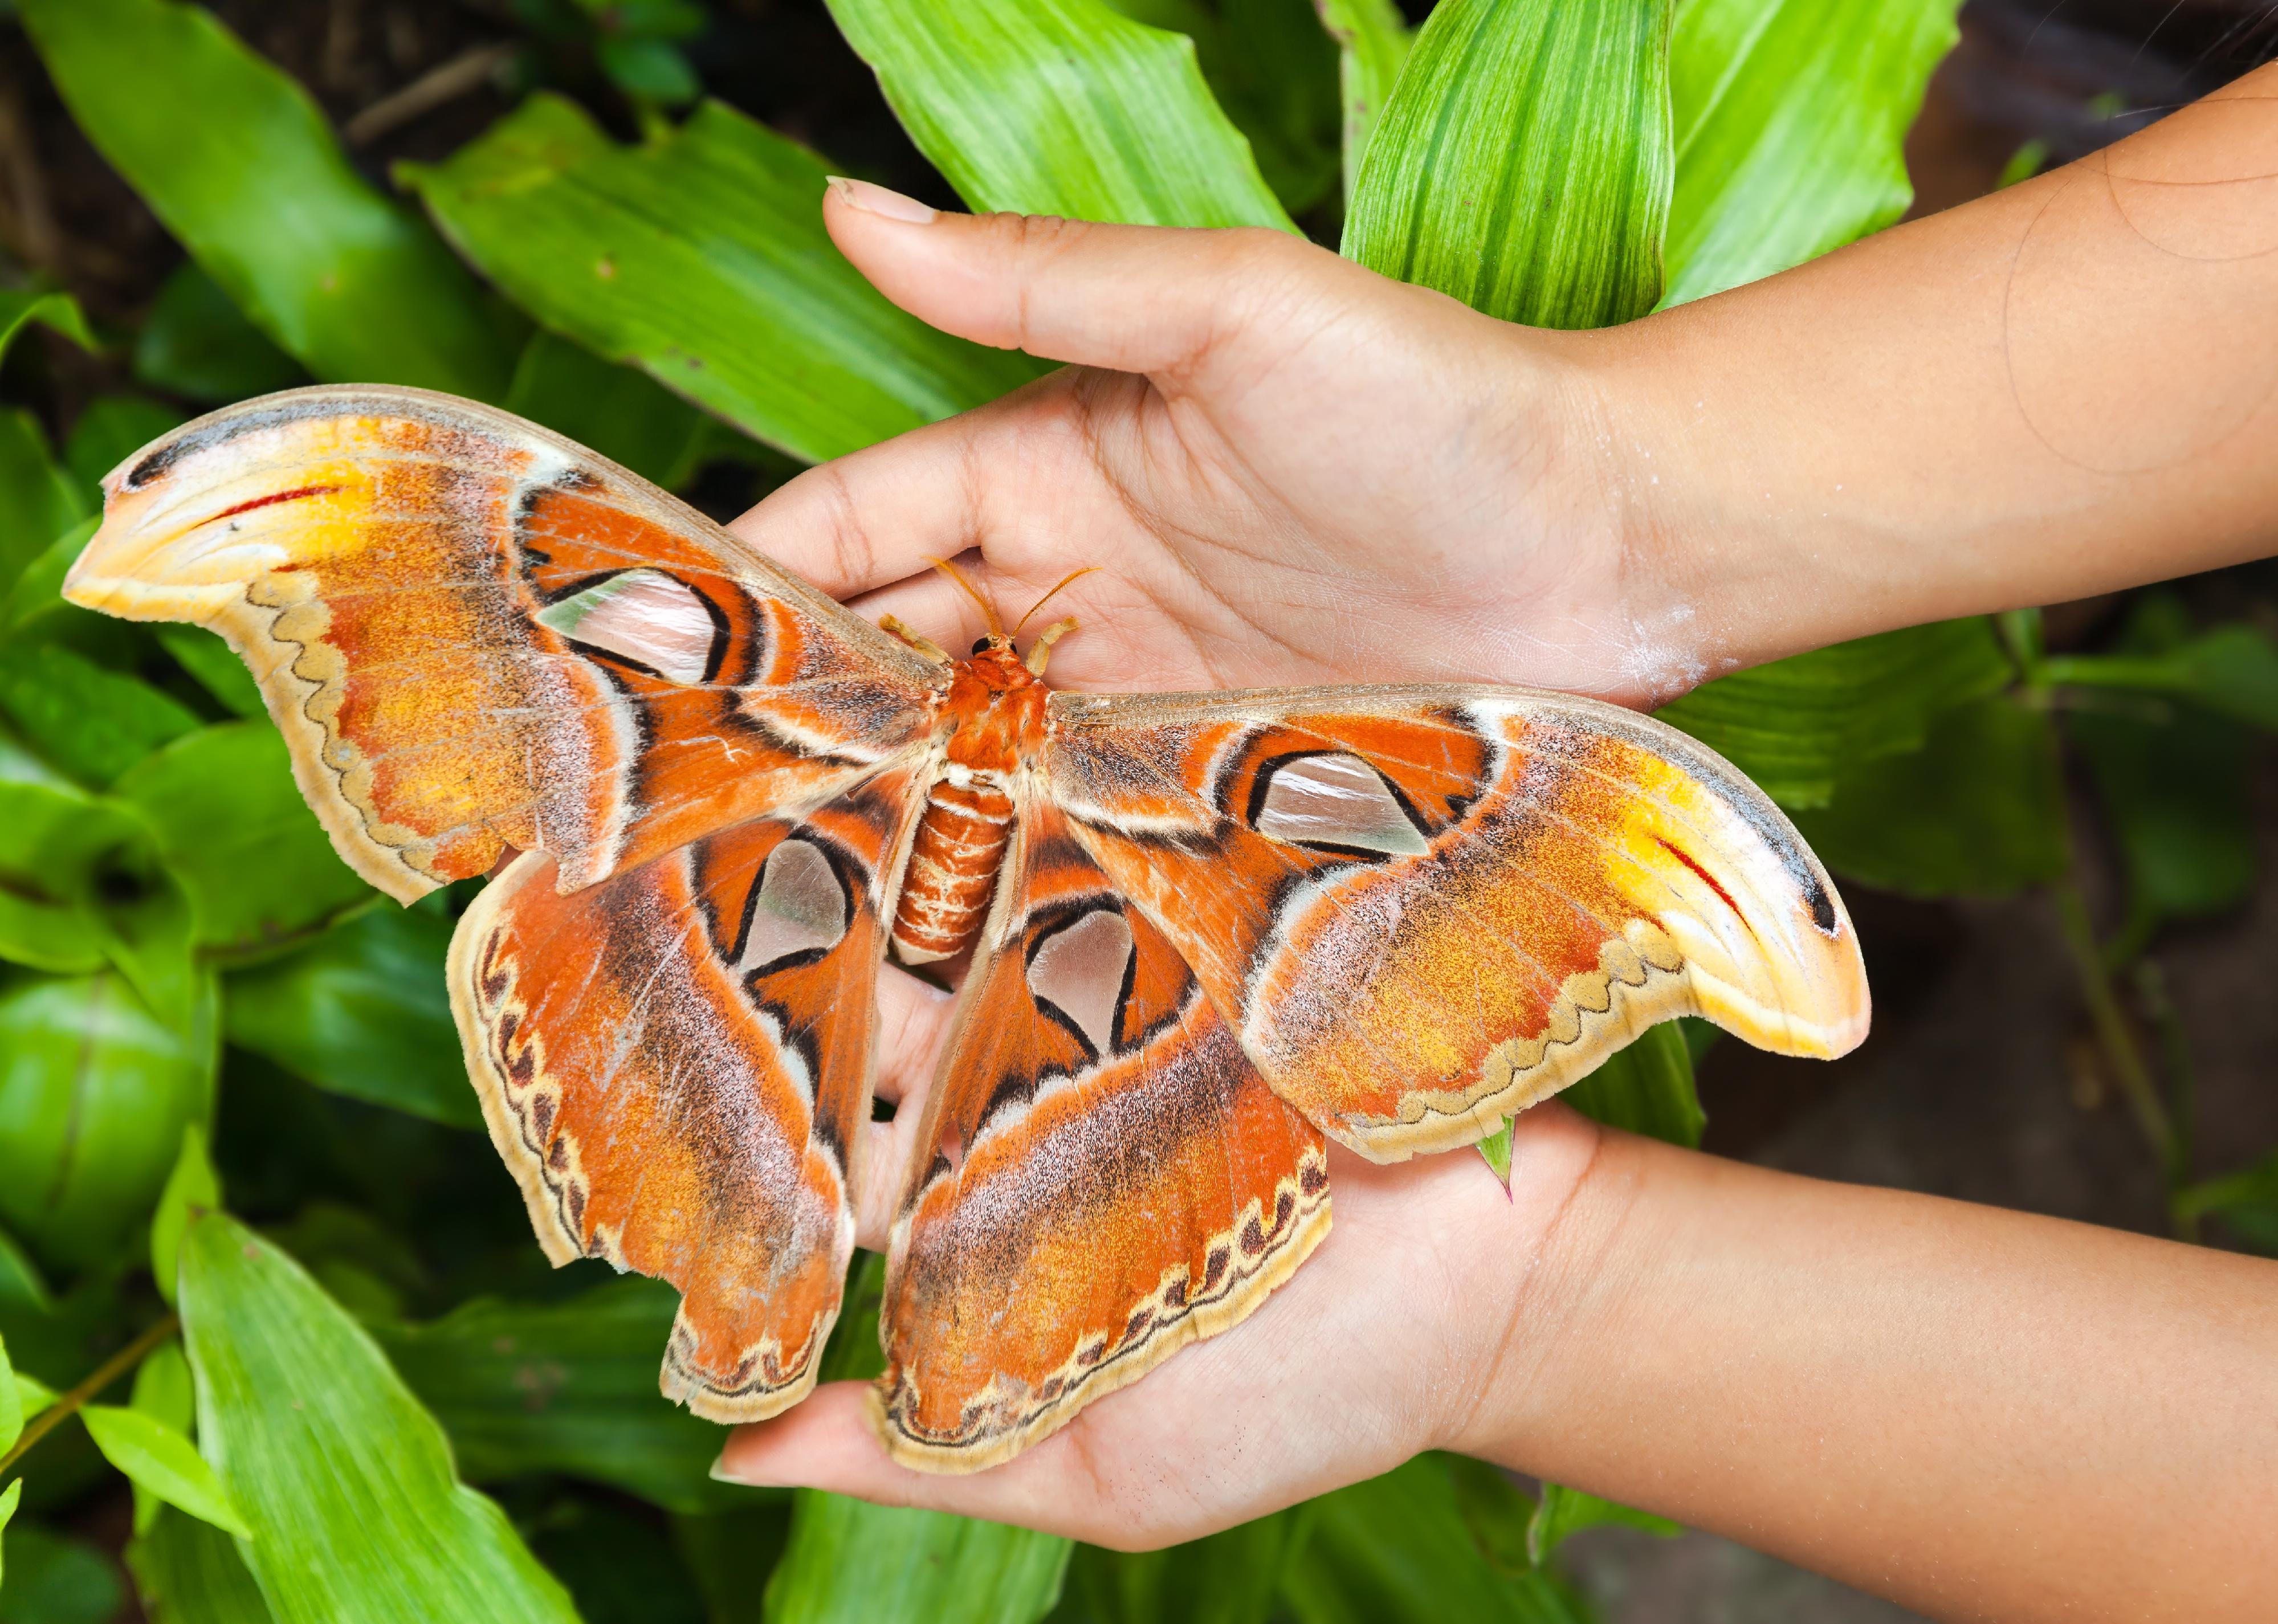 Close-up of large Atlas moth on hand.